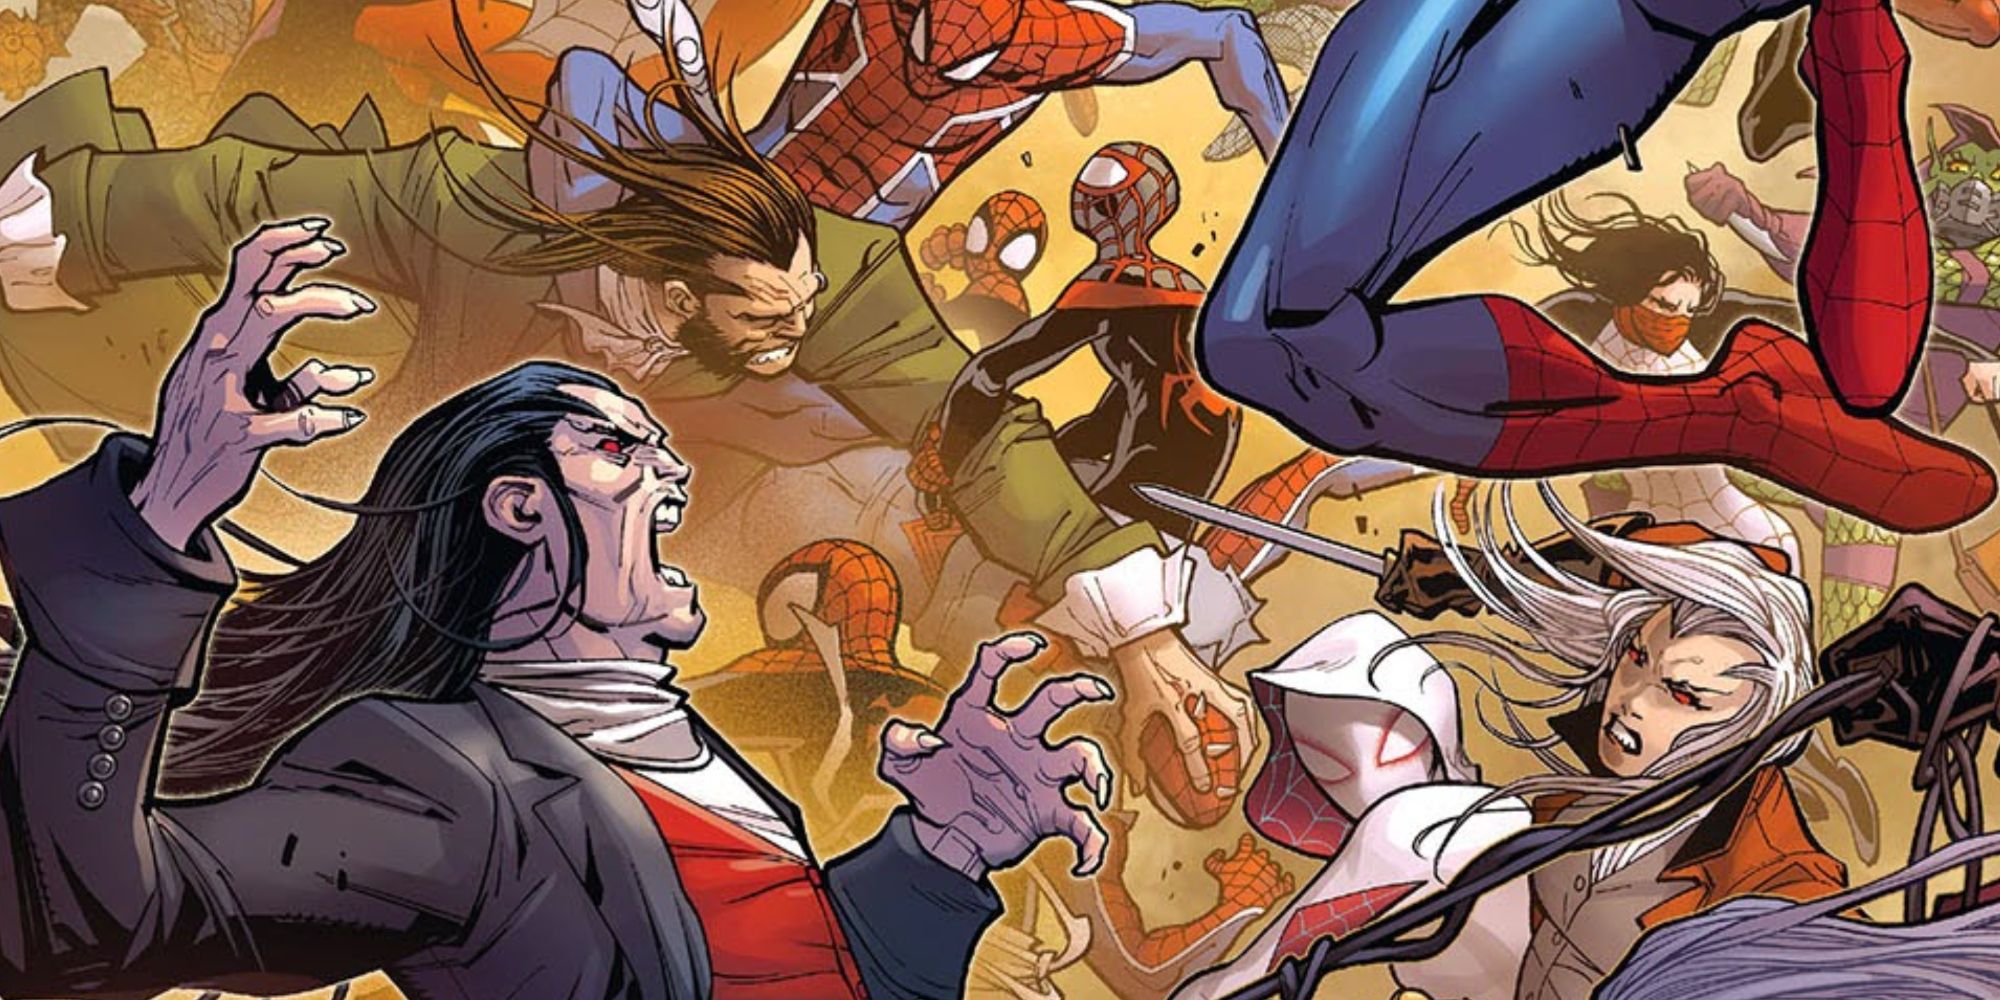 Marvel's Spider-Man 2 Prequel Comic Brings New Villain To Games